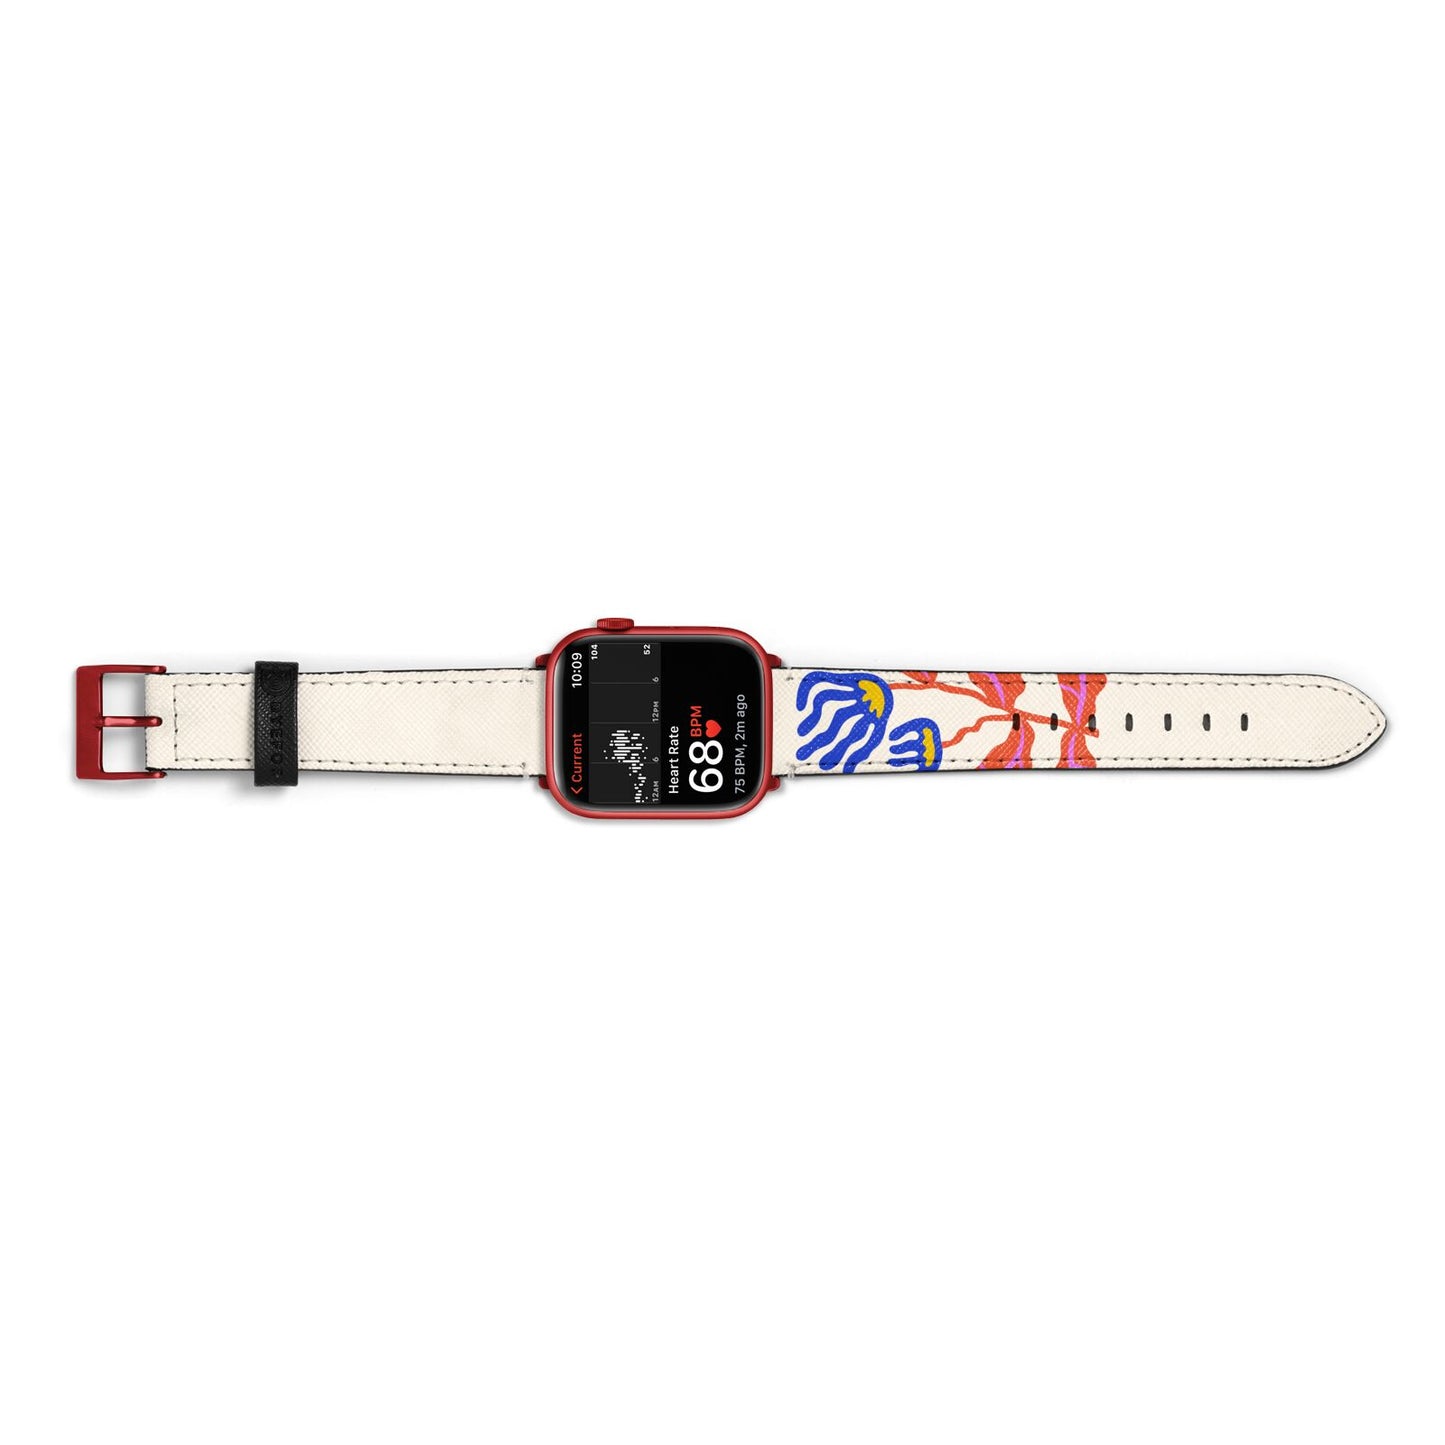 Contemporary Floral Apple Watch Strap Size 38mm Landscape Image Red Hardware